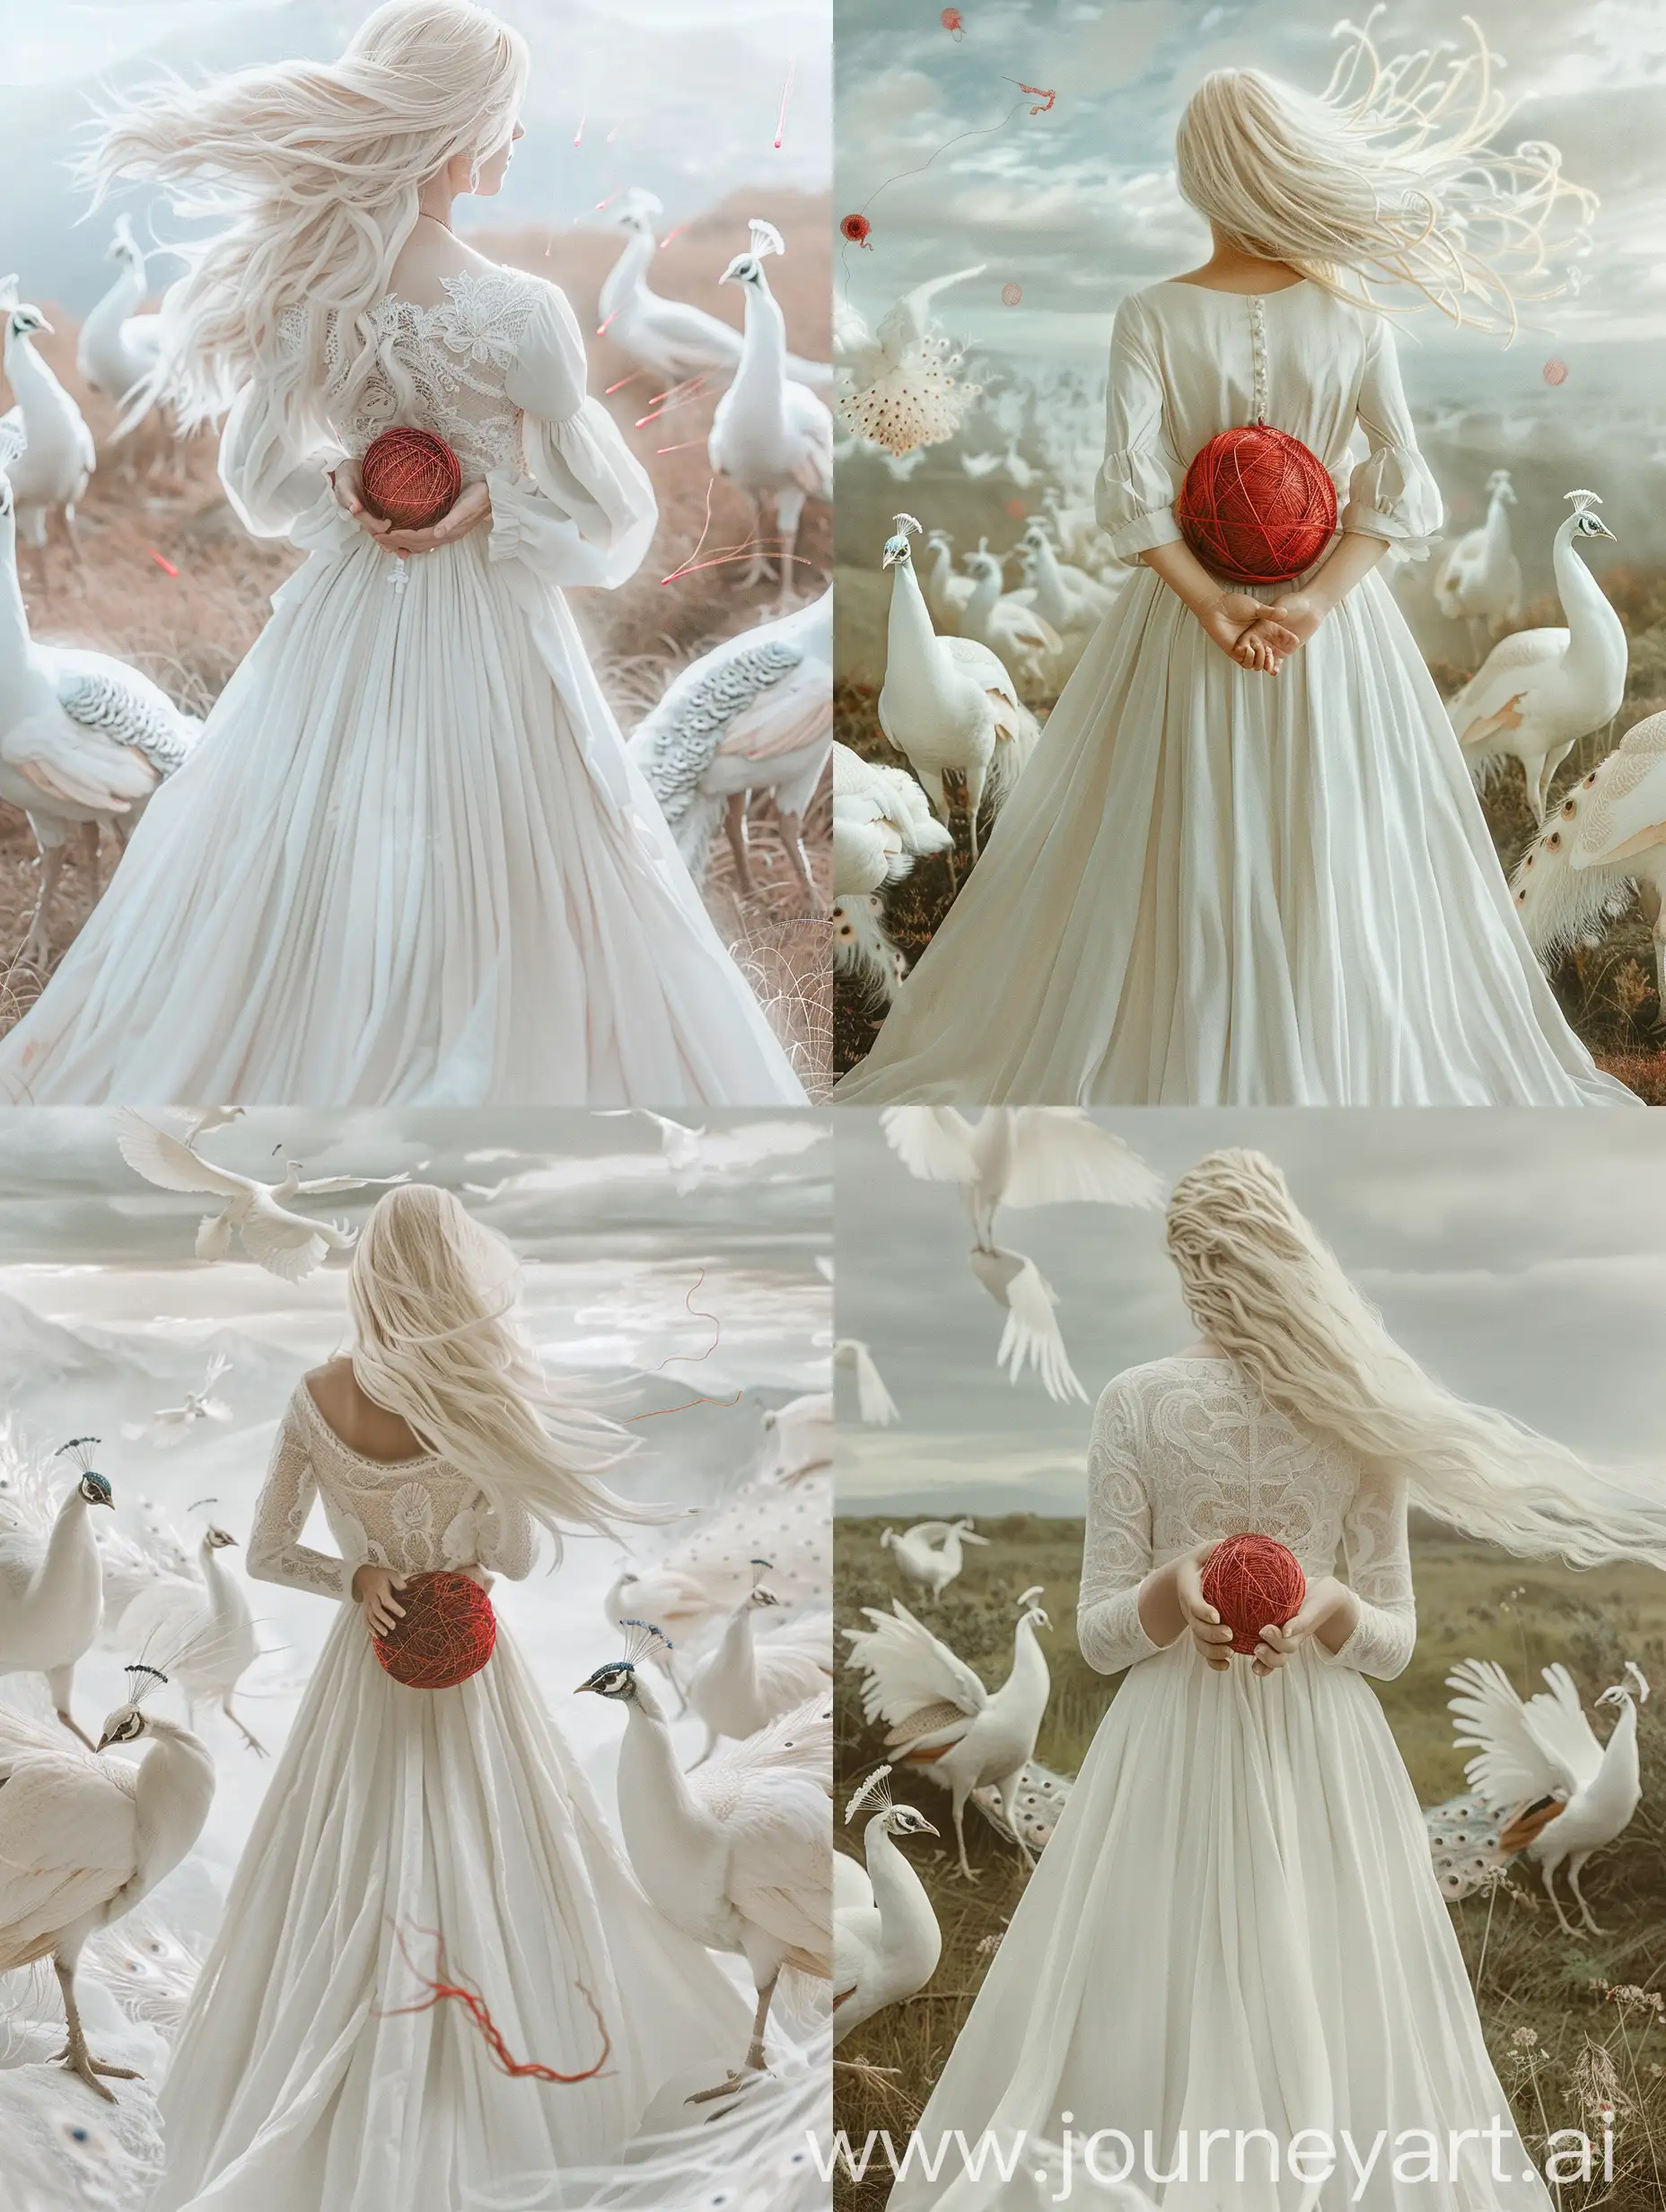 Ethereal-Blonde-Girl-Embracing-Red-Threads-Amidst-White-Peacocks